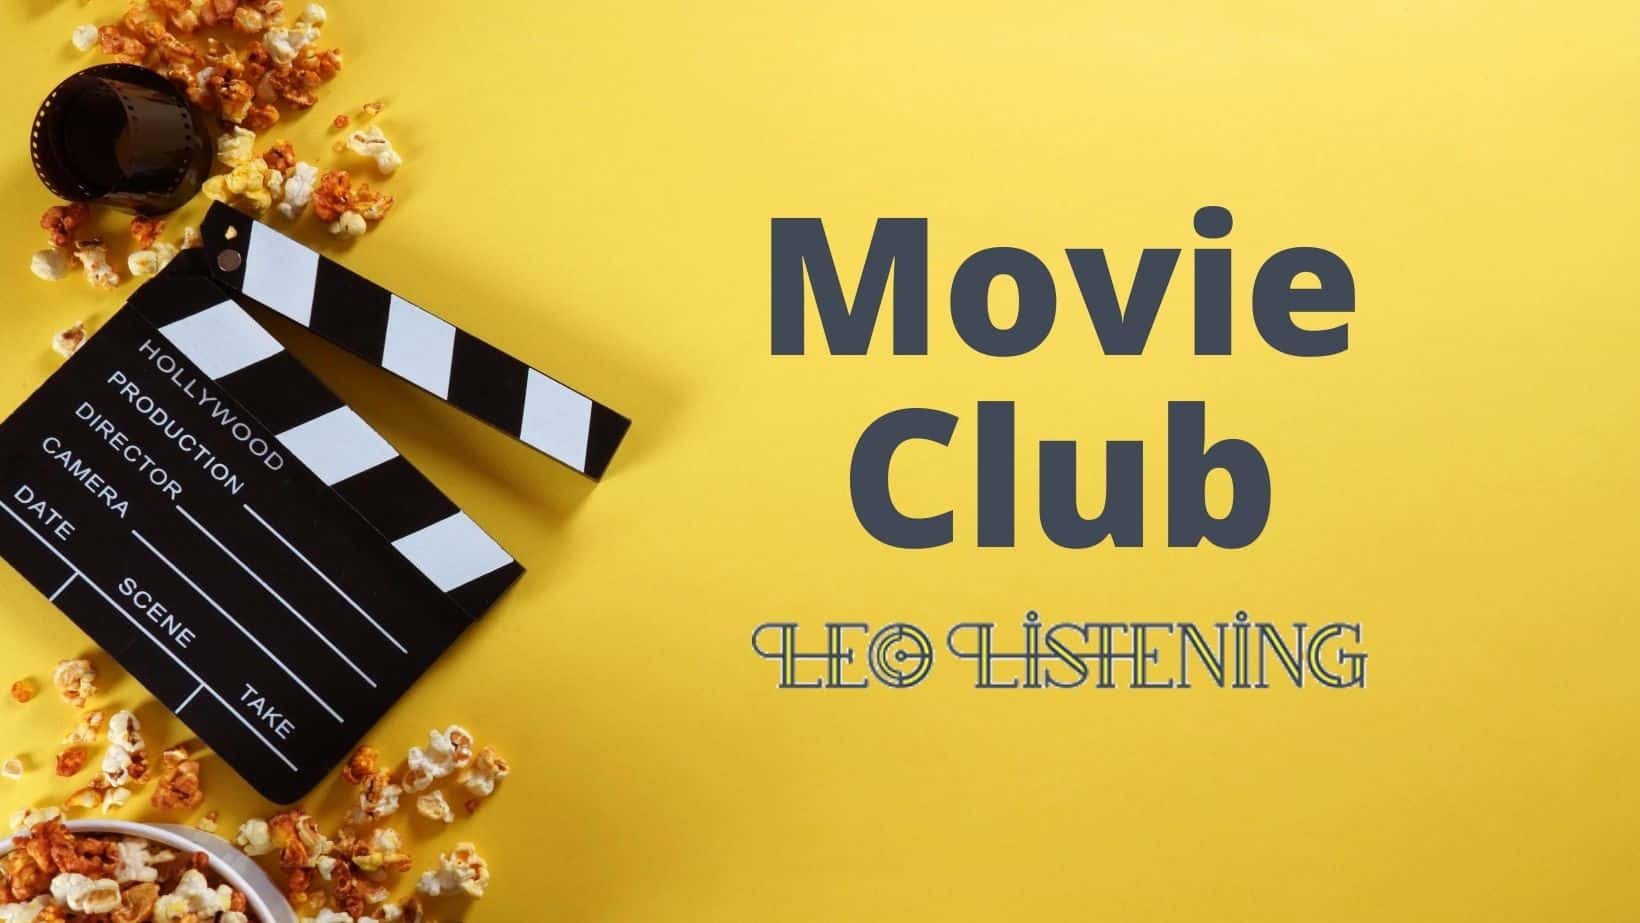 have a conversation in English thanks to movies vertical